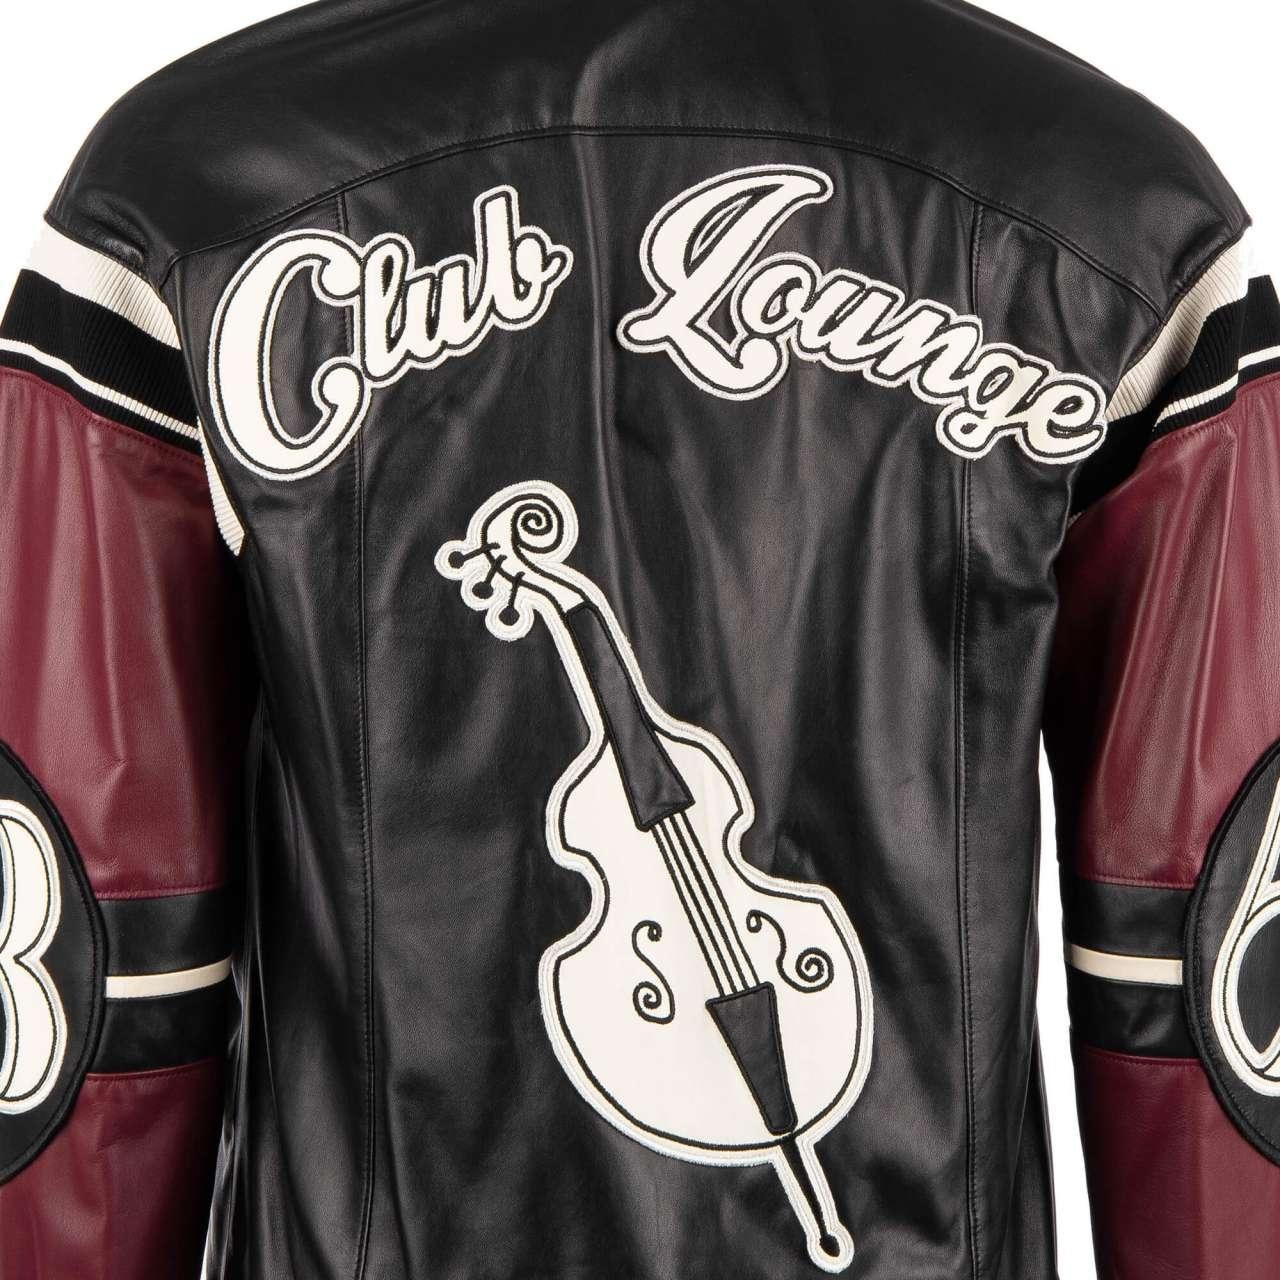 D&G Club Lounge Cello Embroidered Bomber Leather Jacket Black Bordeaux 48 For Sale 3